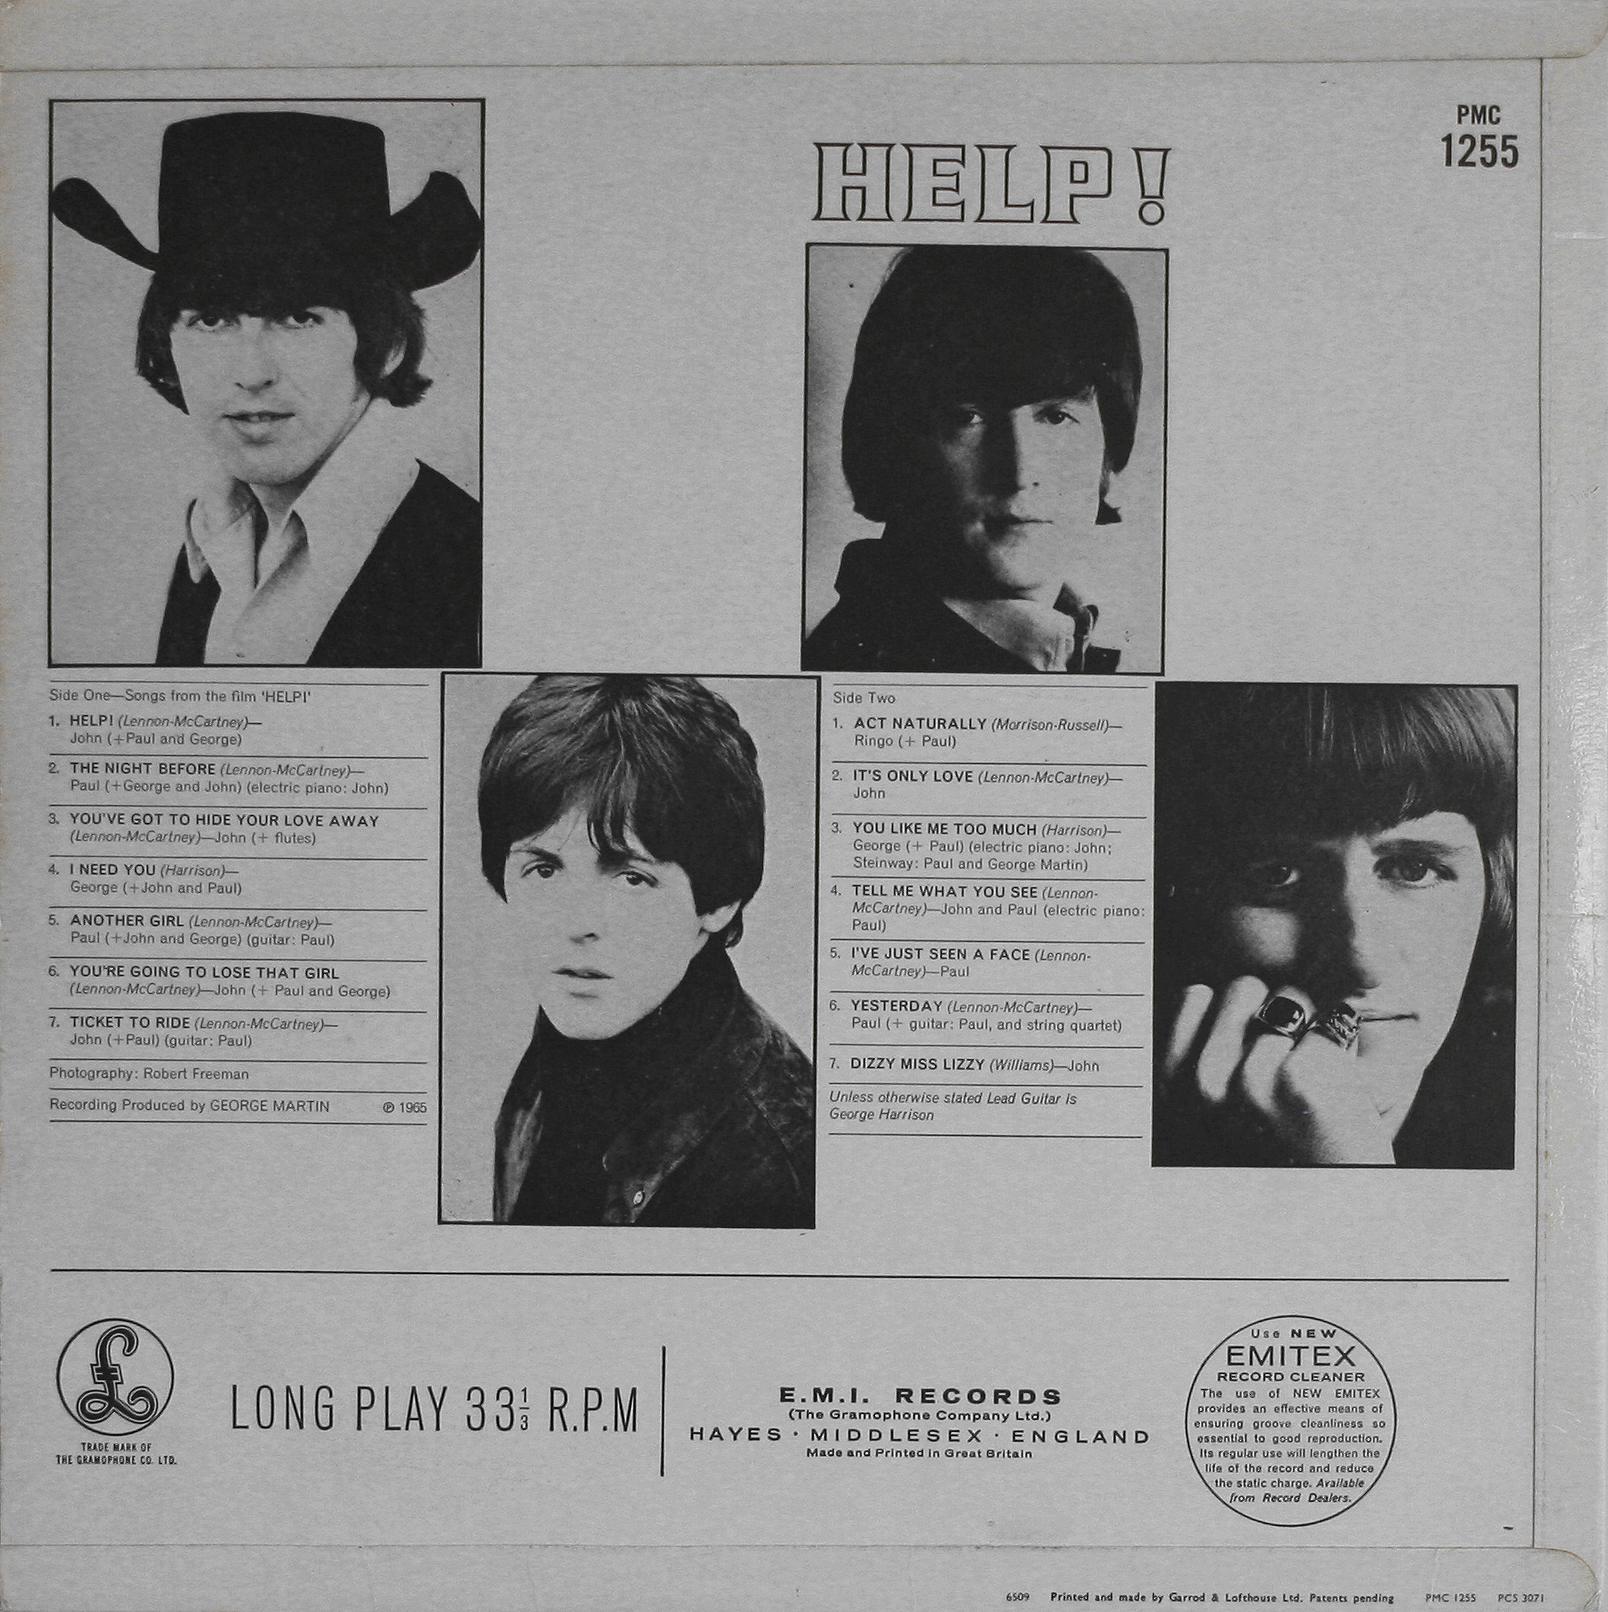 The Beatles Collection » Help!, Parlophone, PMC 1255.